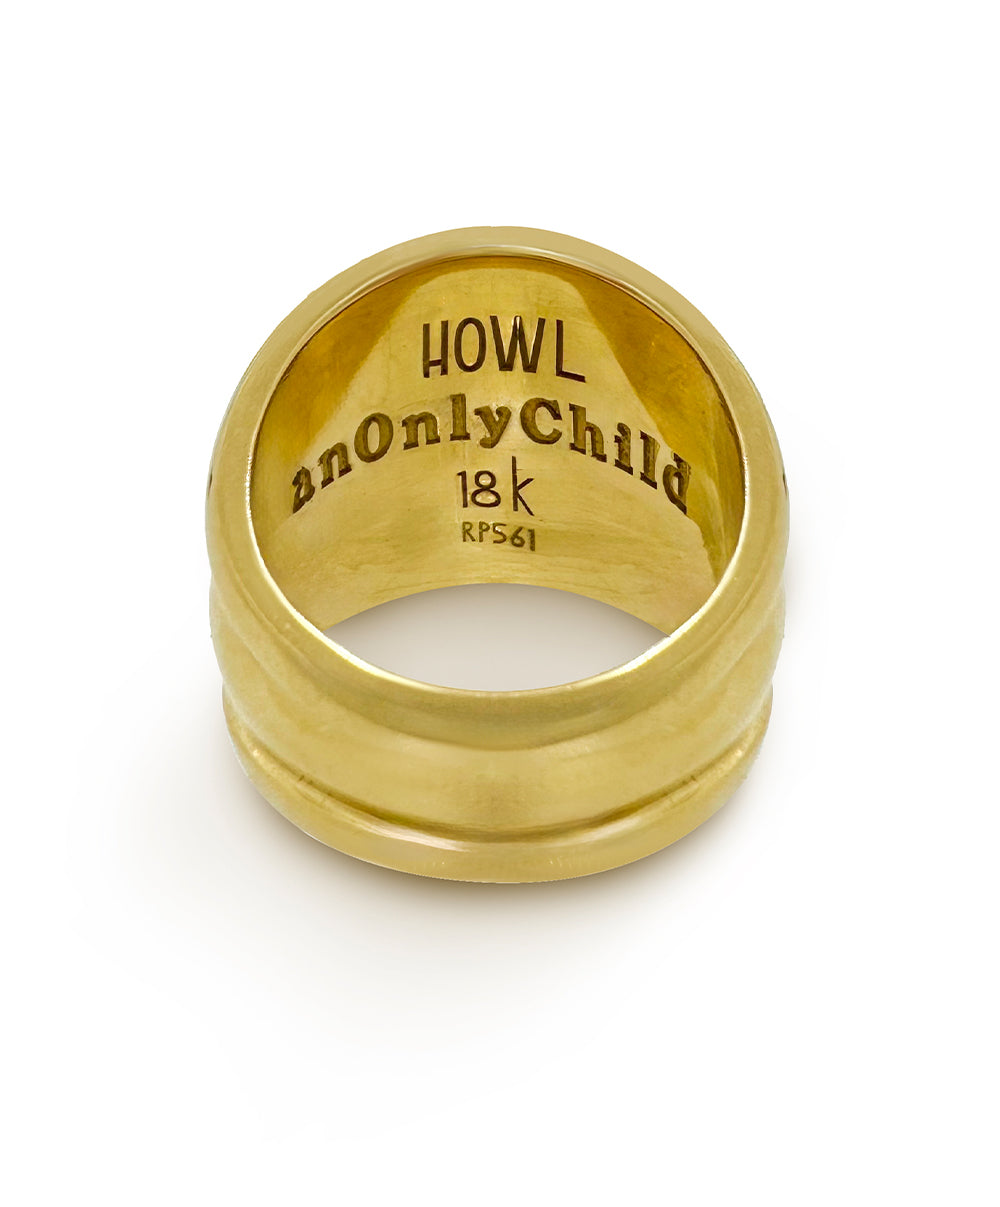 ANONLYCHILD x HOWL COLLABORATION RING